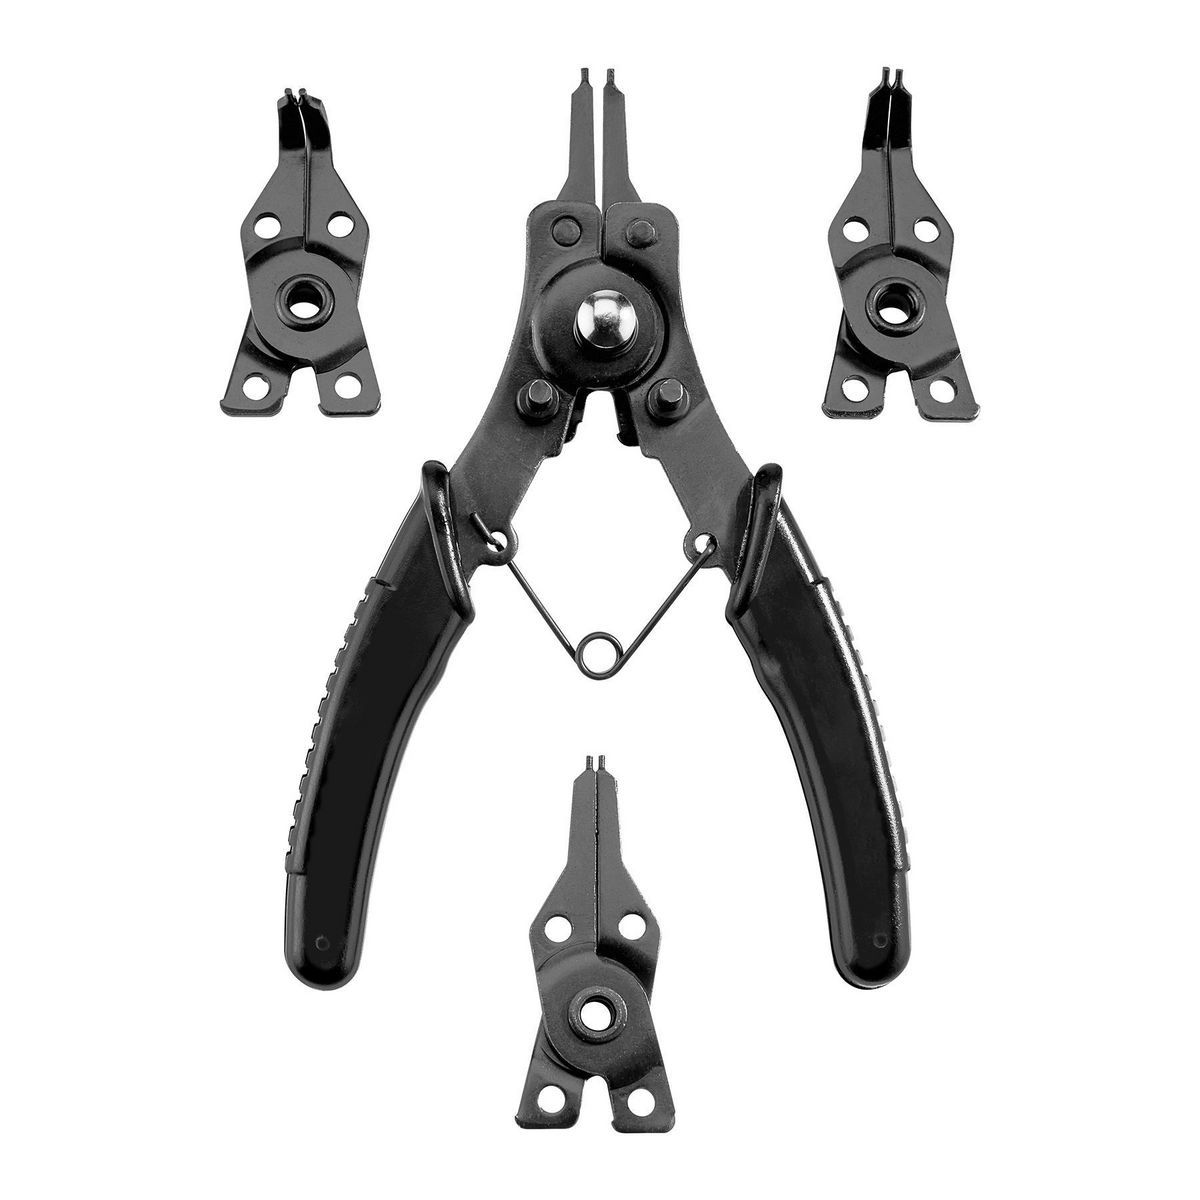 SNAP RING PLIERS WITH INTERCHANGEABLE HEADS 63845